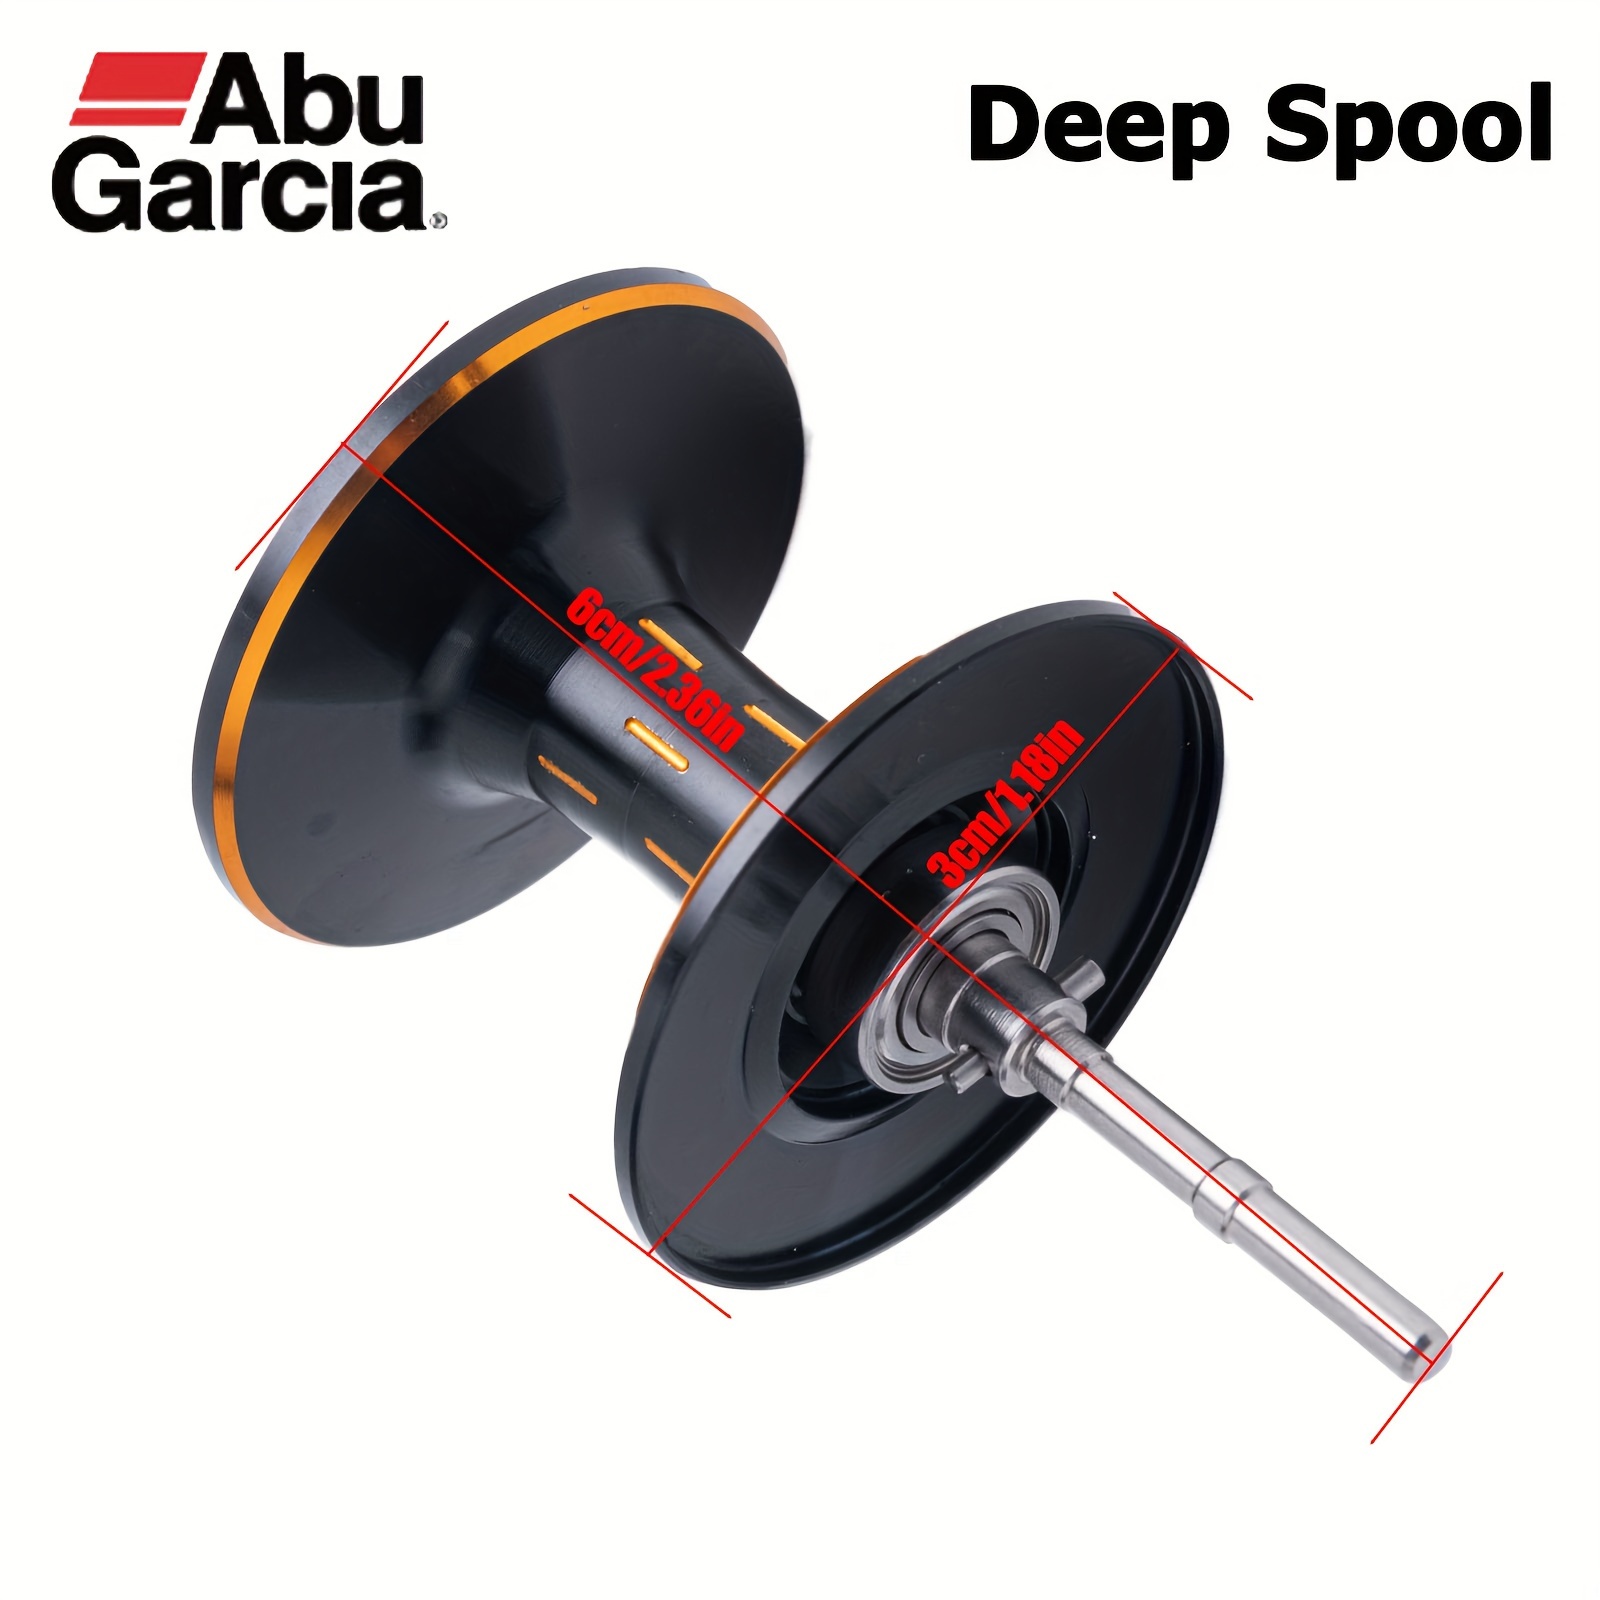 Abu Garcia 1pc Baitcasting Reel Replacement Line Cup For ABU PMAX3  Baitcasting Reel, Deep Spool/Shallow Spool To Meet Your Different Fishing  Needs